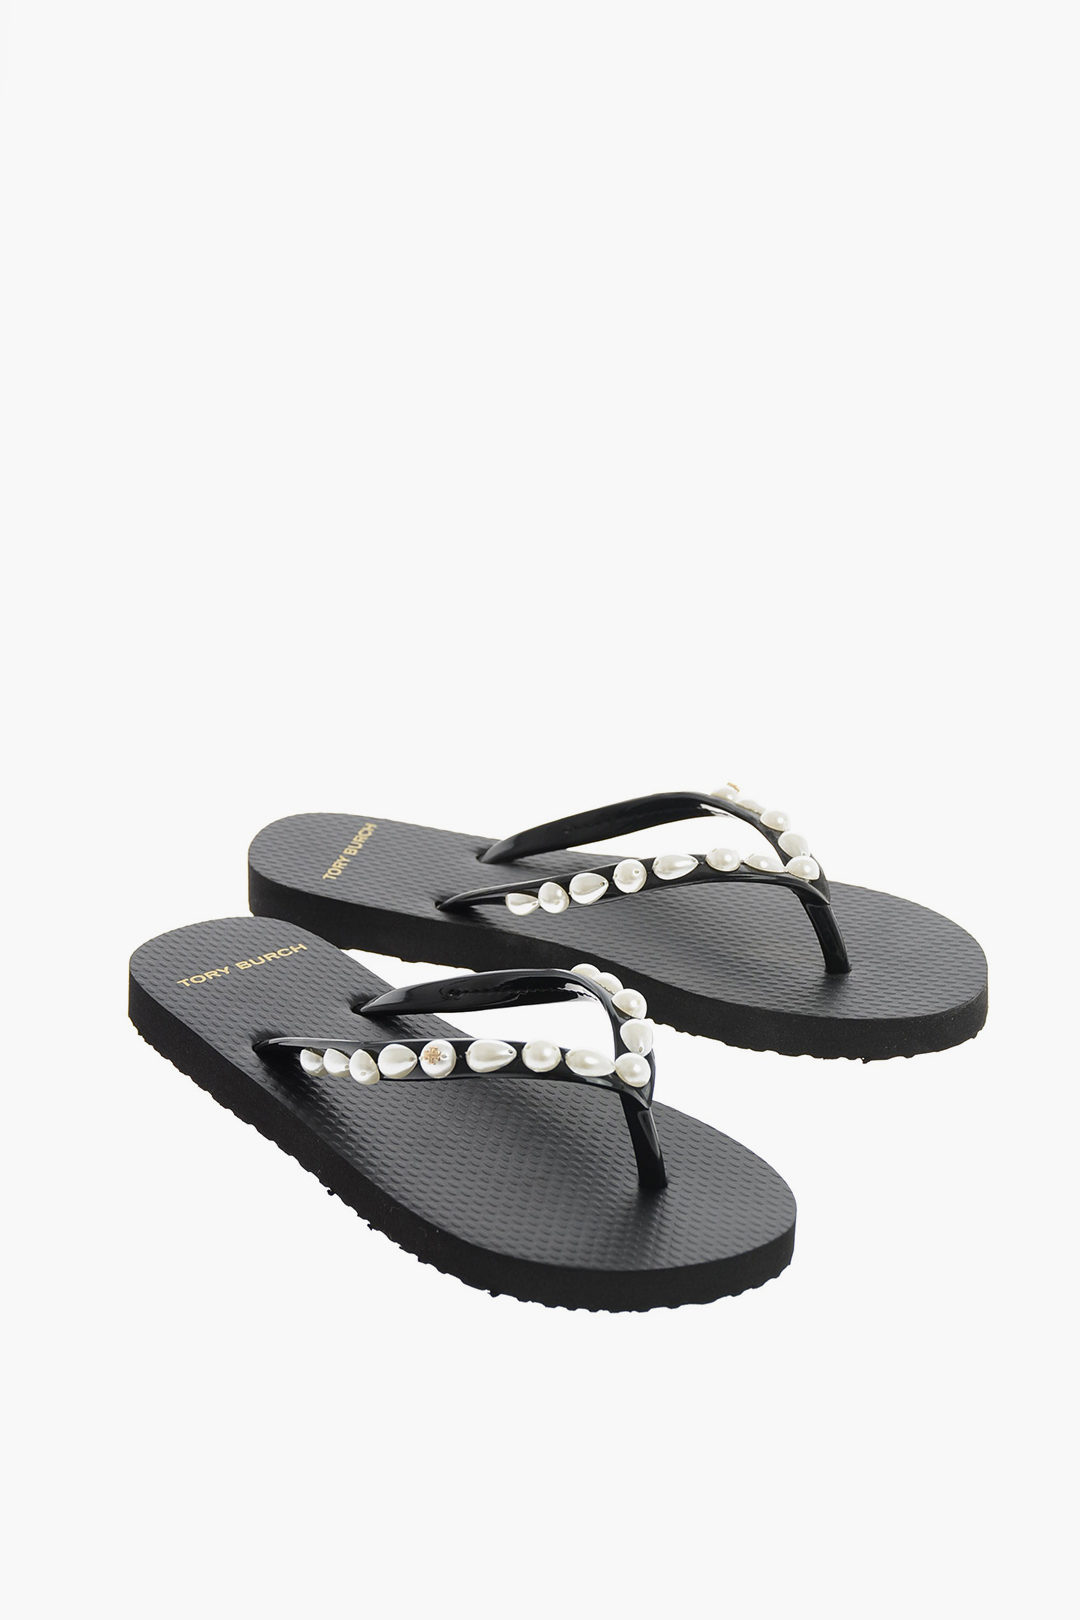 Tory Burch Rubber Flip flops with pearl detail women - Glamood Outlet